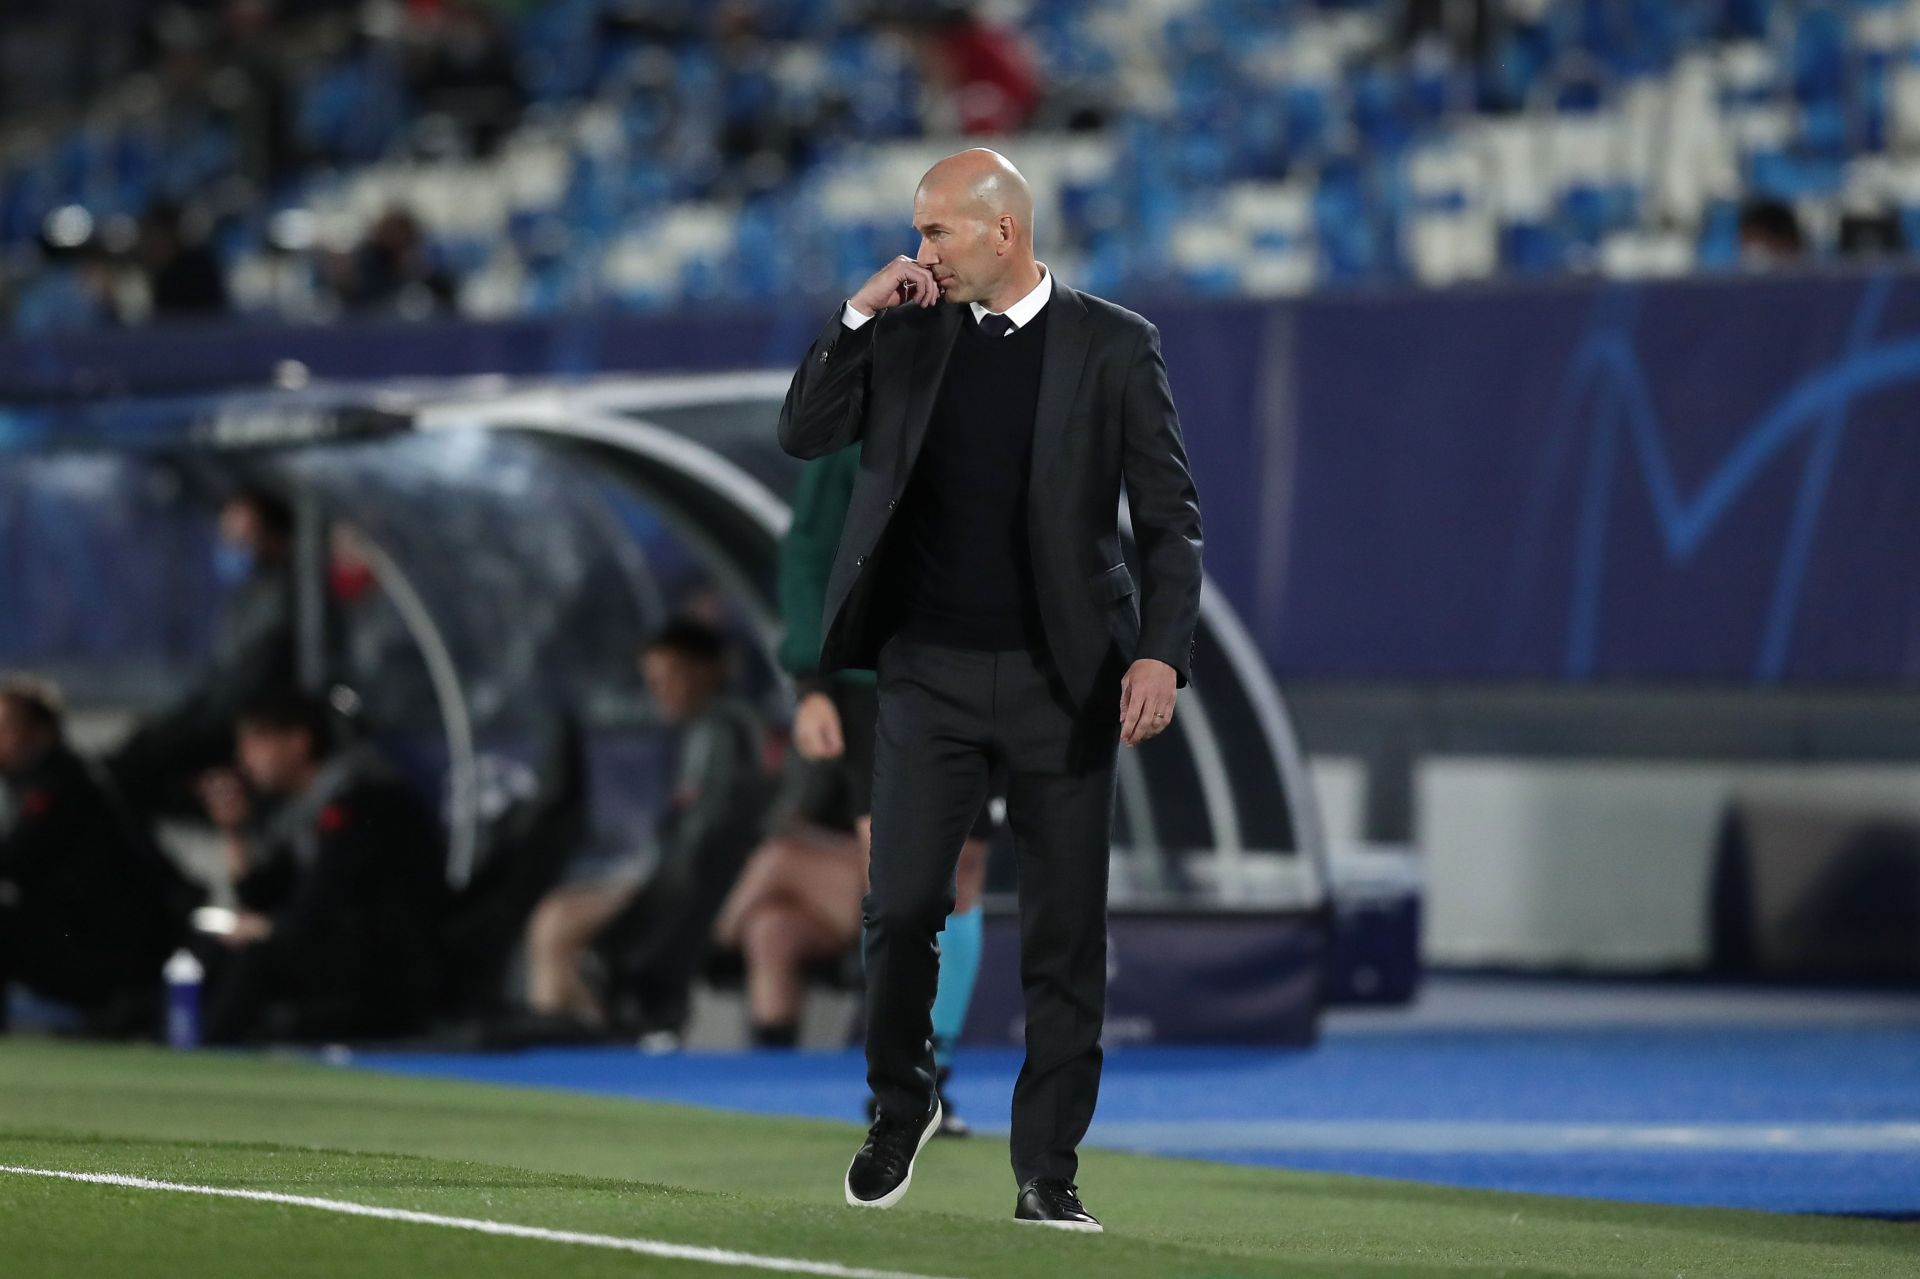 Zinedine Zidane could take charge at the Parc des Princes soon.